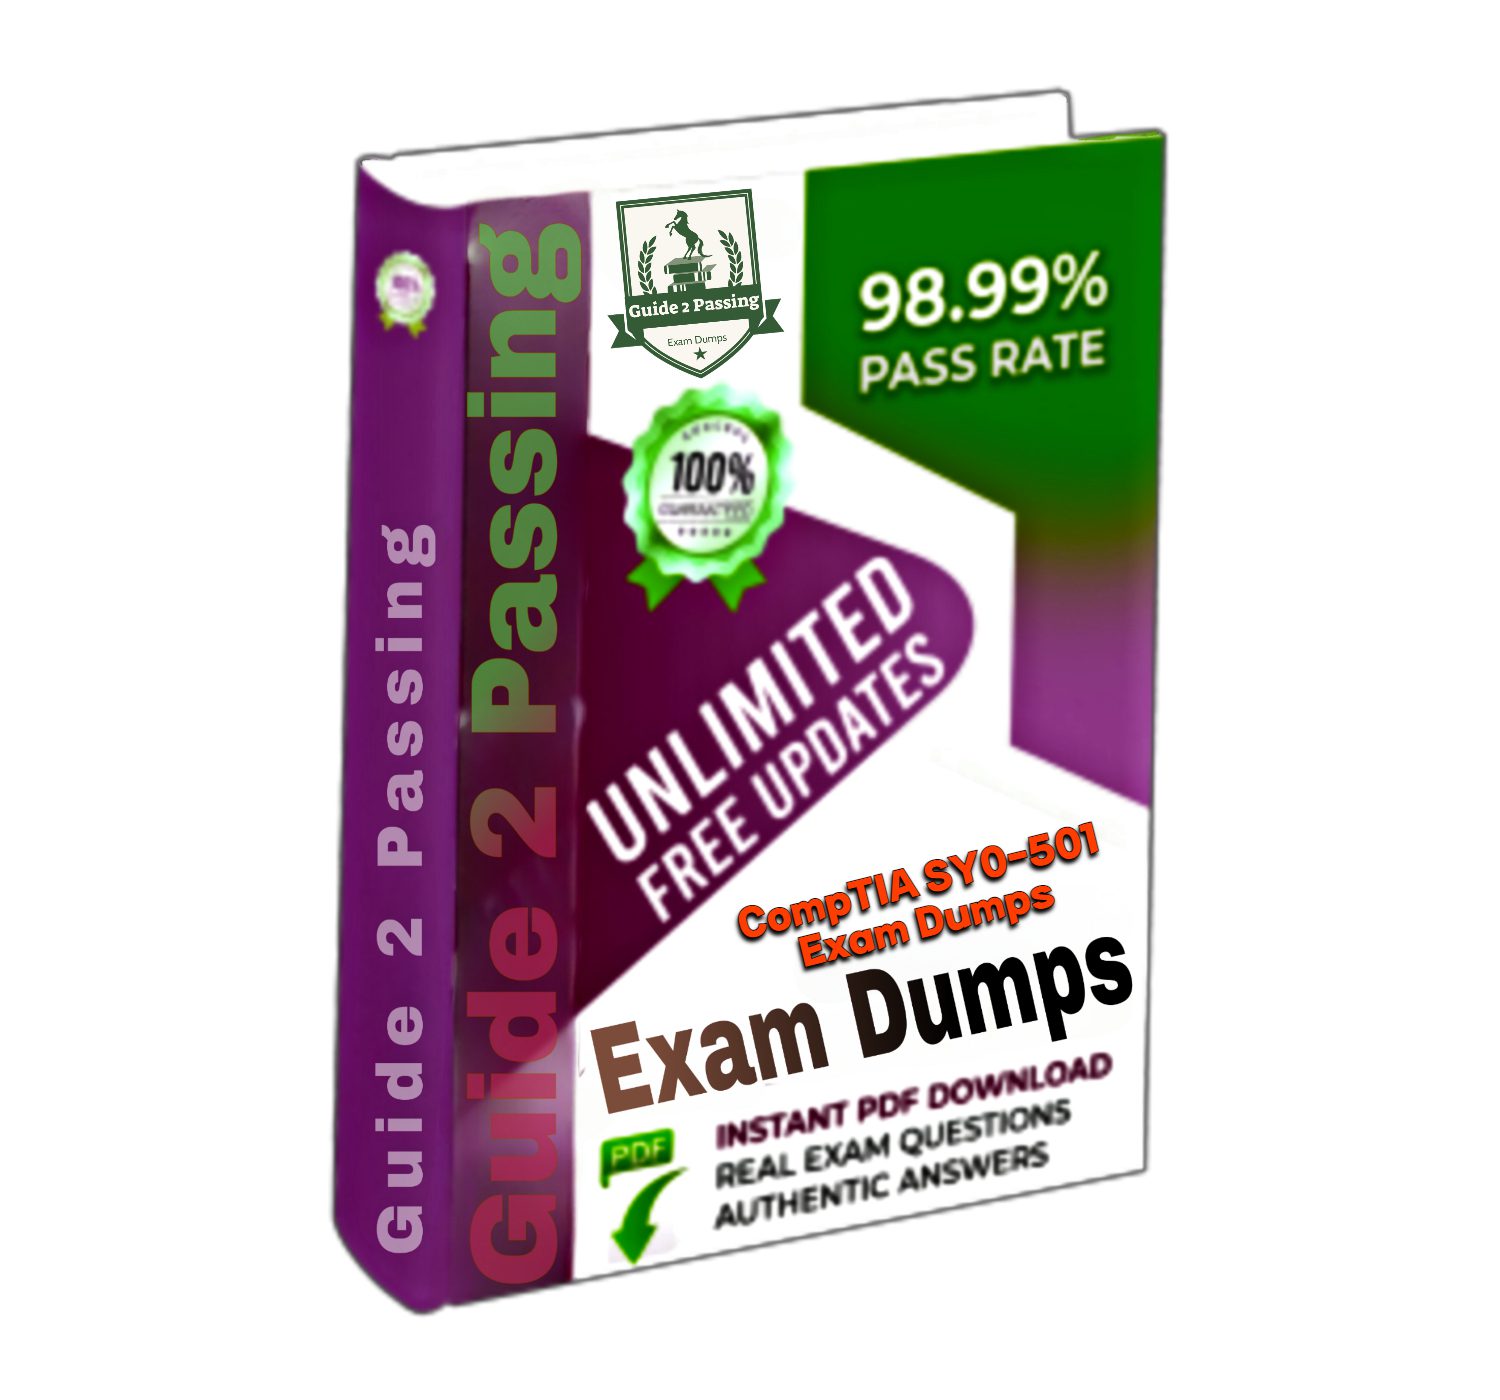 Pass Your CompTIA SY0-501 Exam Dumps From Guide 2 Passing